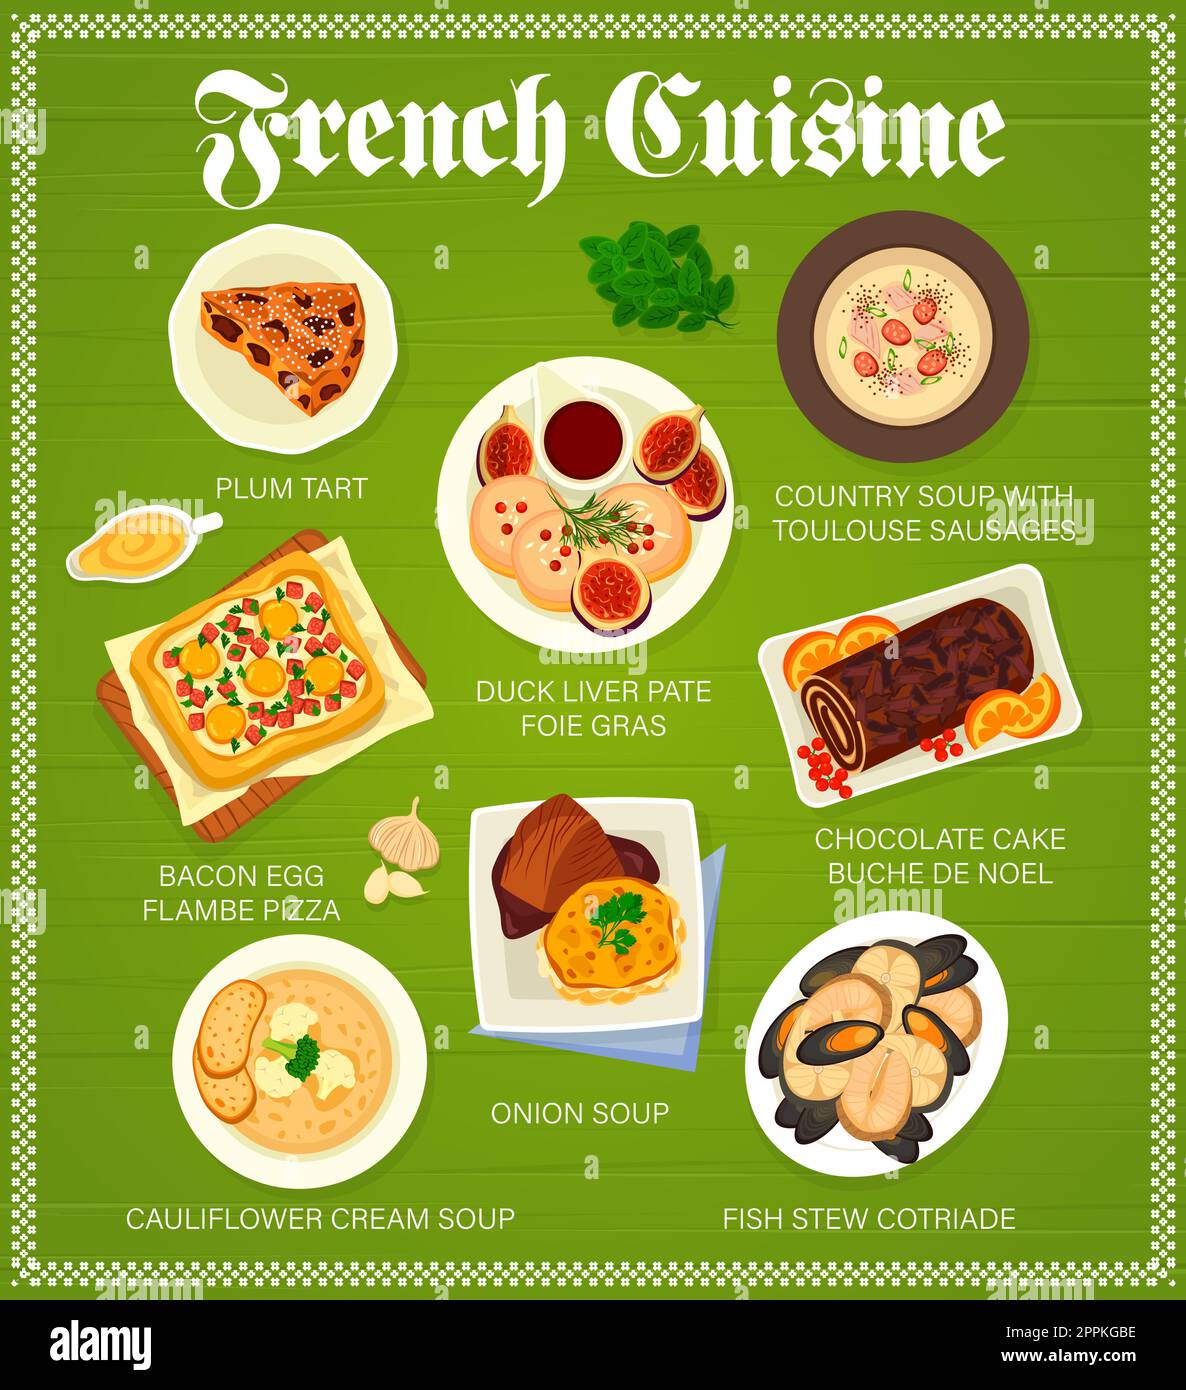 French cuisine menu, food of France, restaurant plates and Paris meals, vector. French cuisine gourmet dishes, onion soup and duck liver foie gras, fi Stock Vector